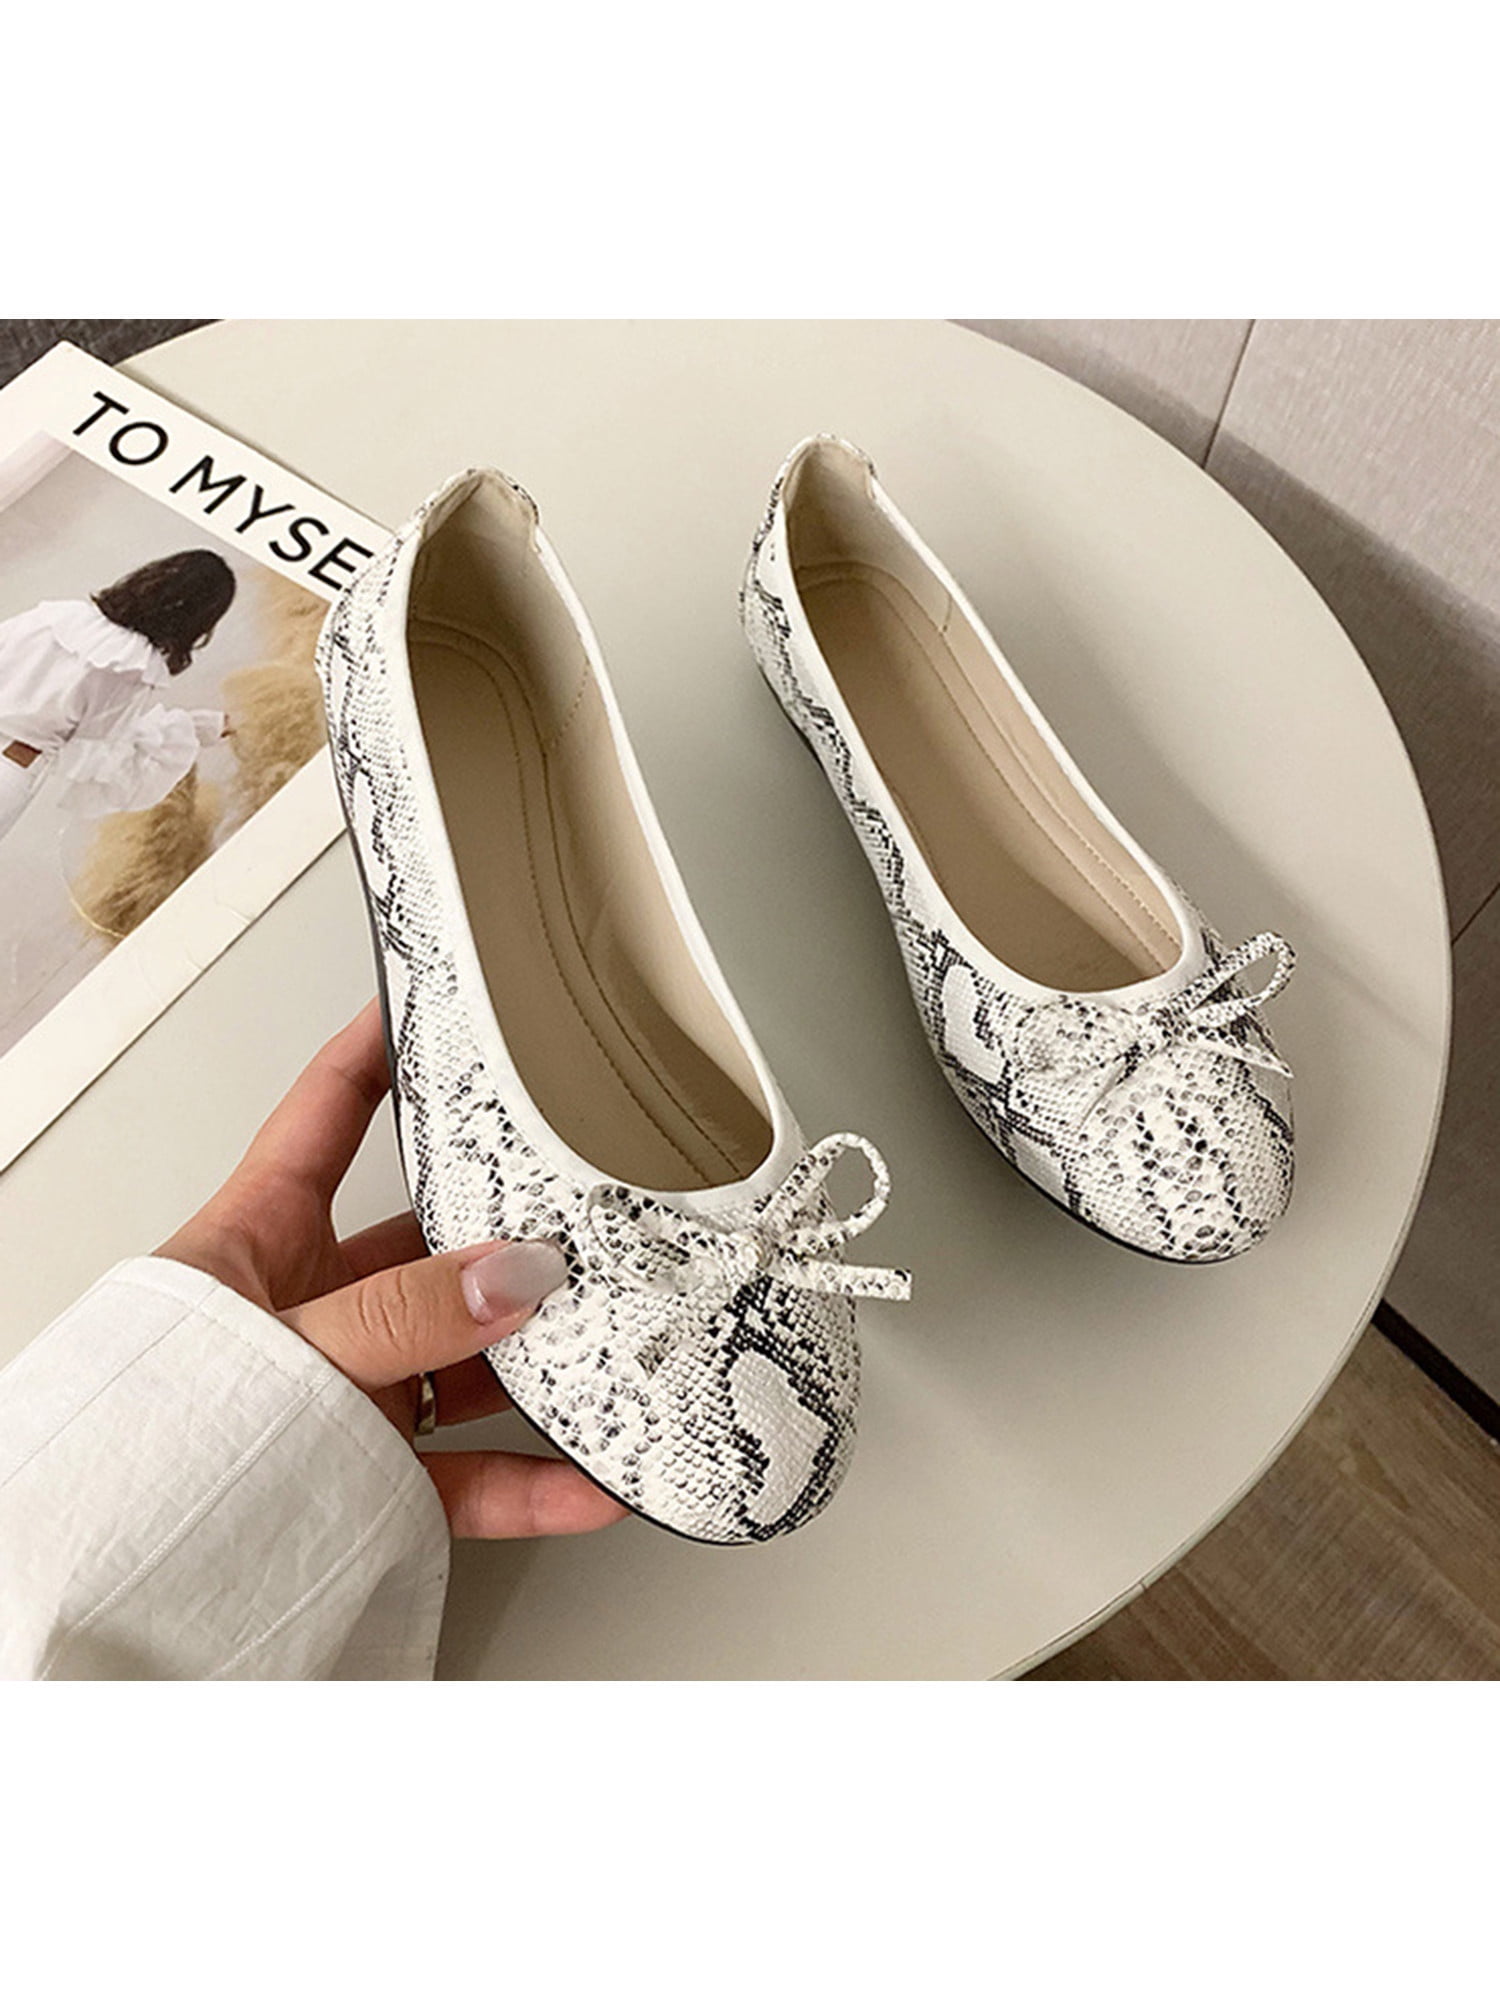 New Womens Diamante Ballet Flat Ladies Casual Ballerina Dolly Party Pumps Shoes 